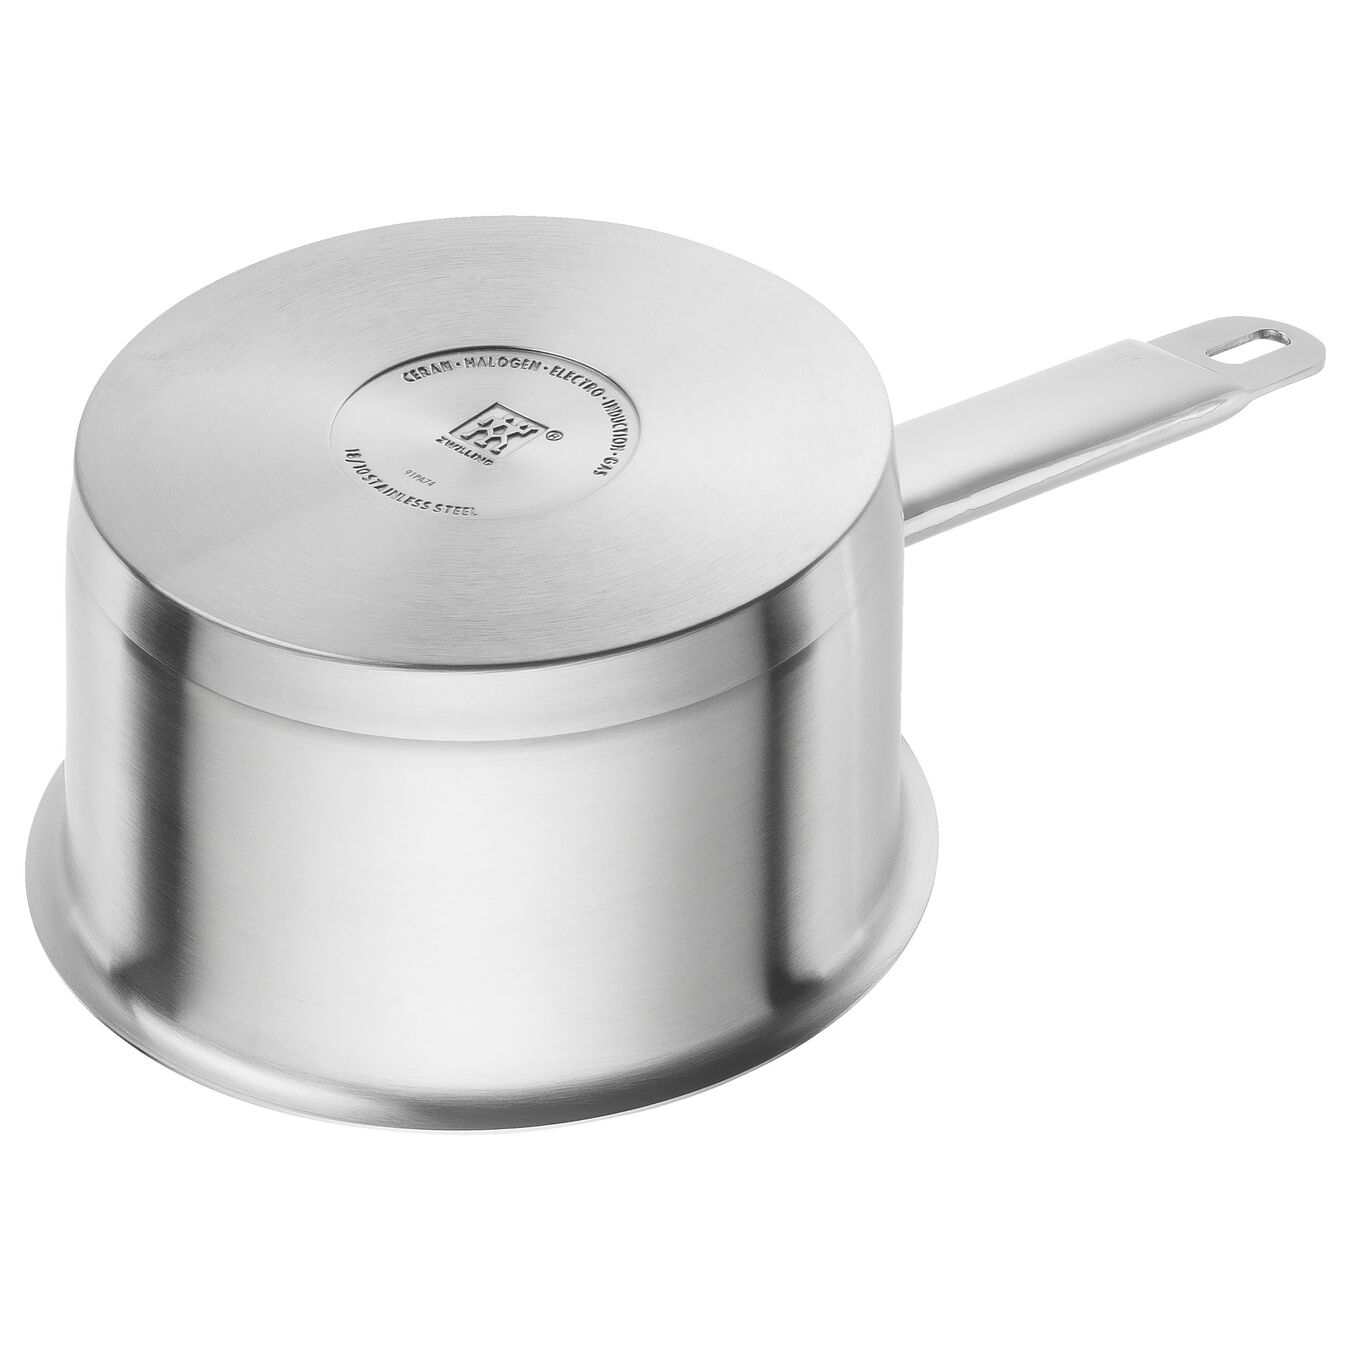 3 l 18/10 Stainless Steel round Sauce pan, silver,,large 4